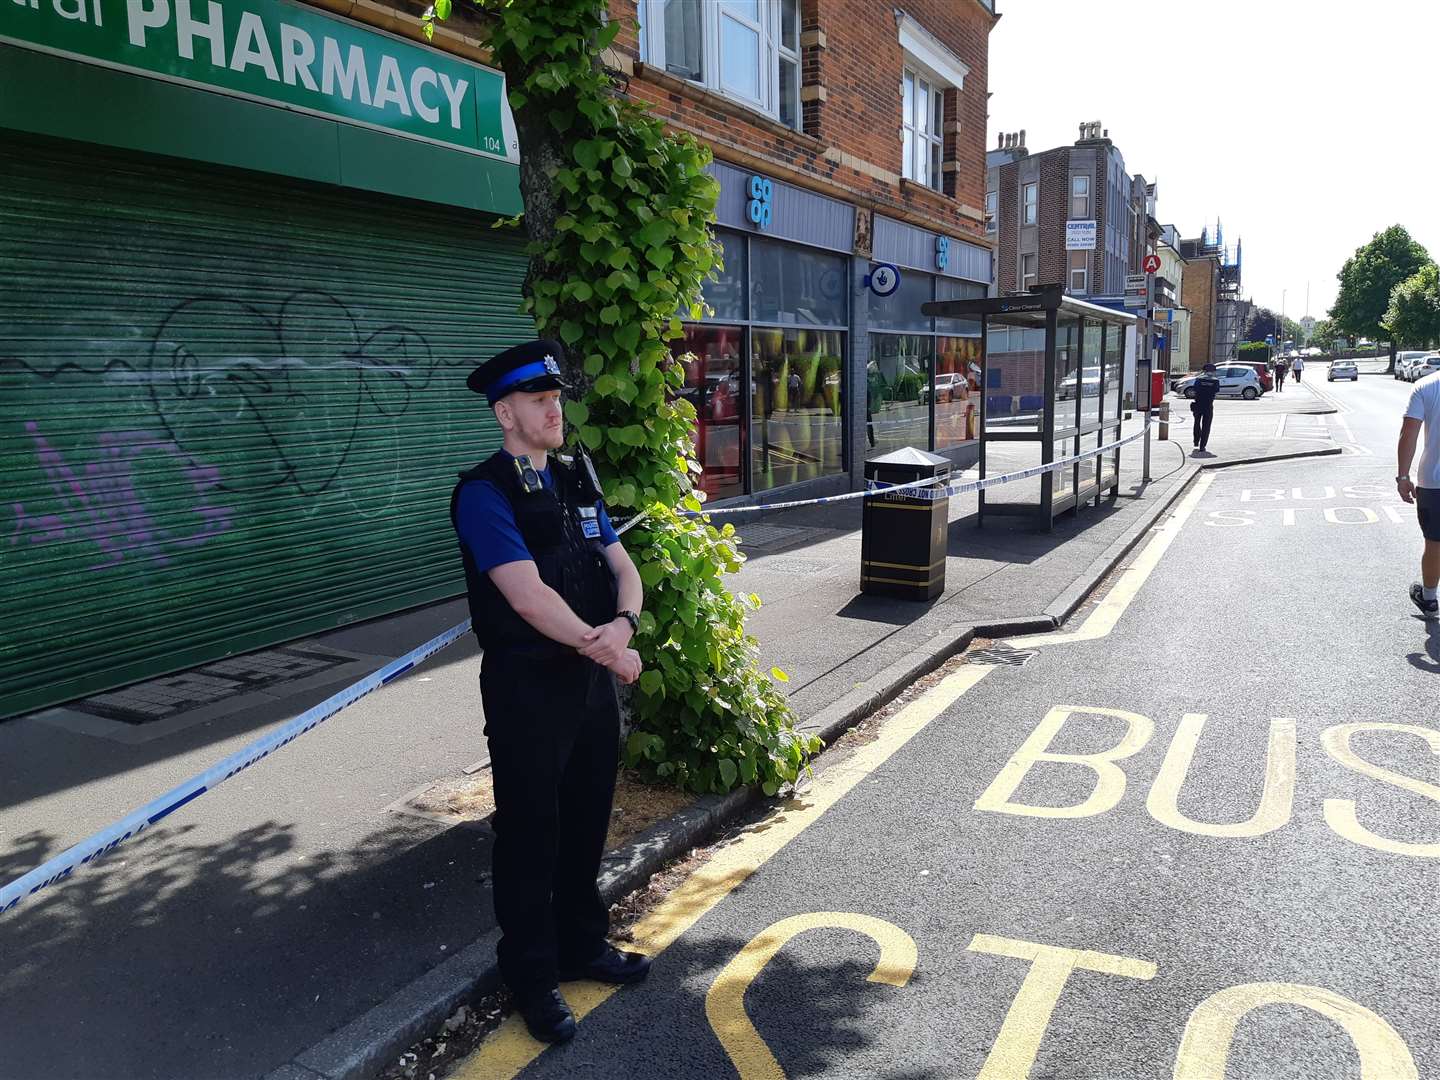 An area near the Co-op in Folkestone guarded by a PCSO further away from the stabbings